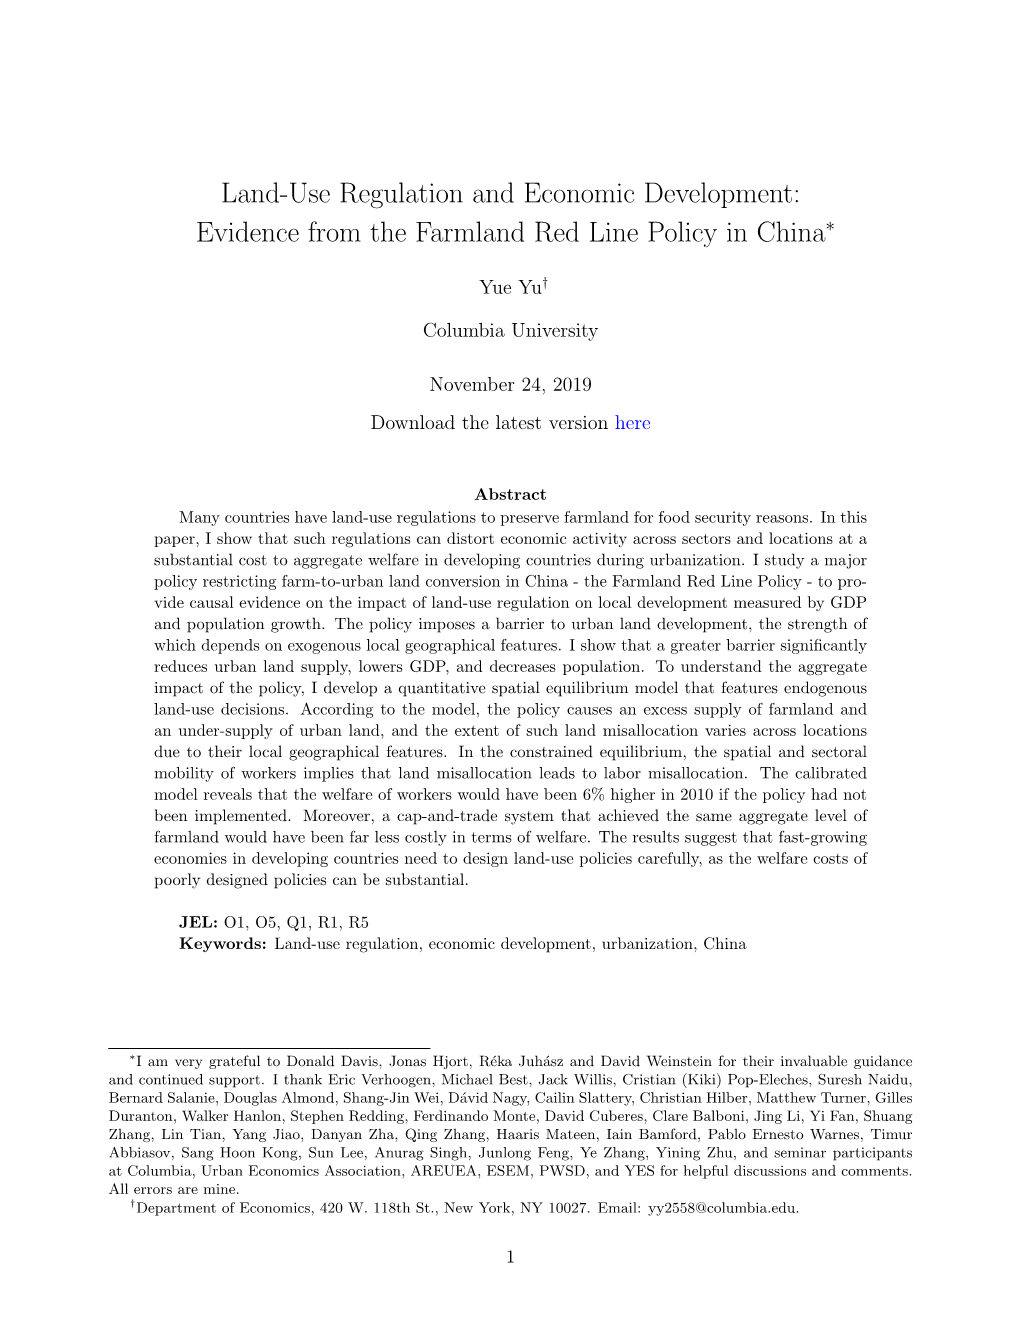 Land-Use Regulation and Economic Development: Evidence from the Farmland Red Line Policy in China∗